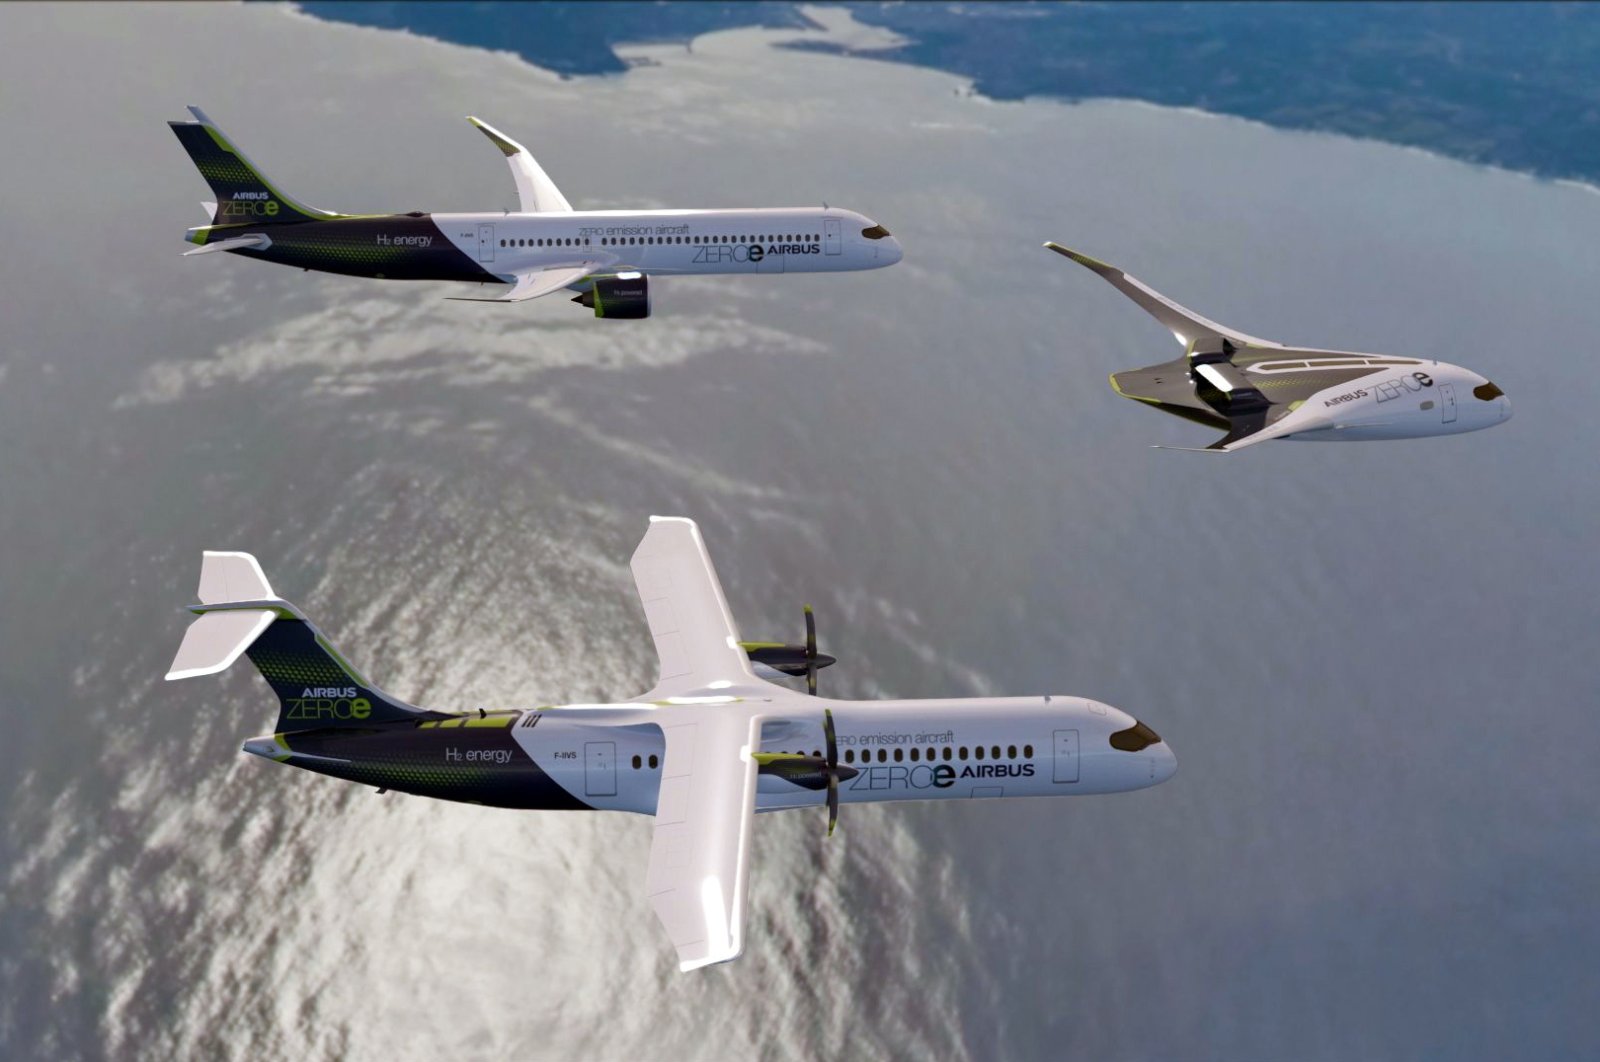 This handout computer-generated image released on Sept. 21, 2020, by the European multinational aeronautics company Airbus shows three prototypes of zero-emission hydrogen-powered aircraft. (Photo by AIRBUS / AFP)